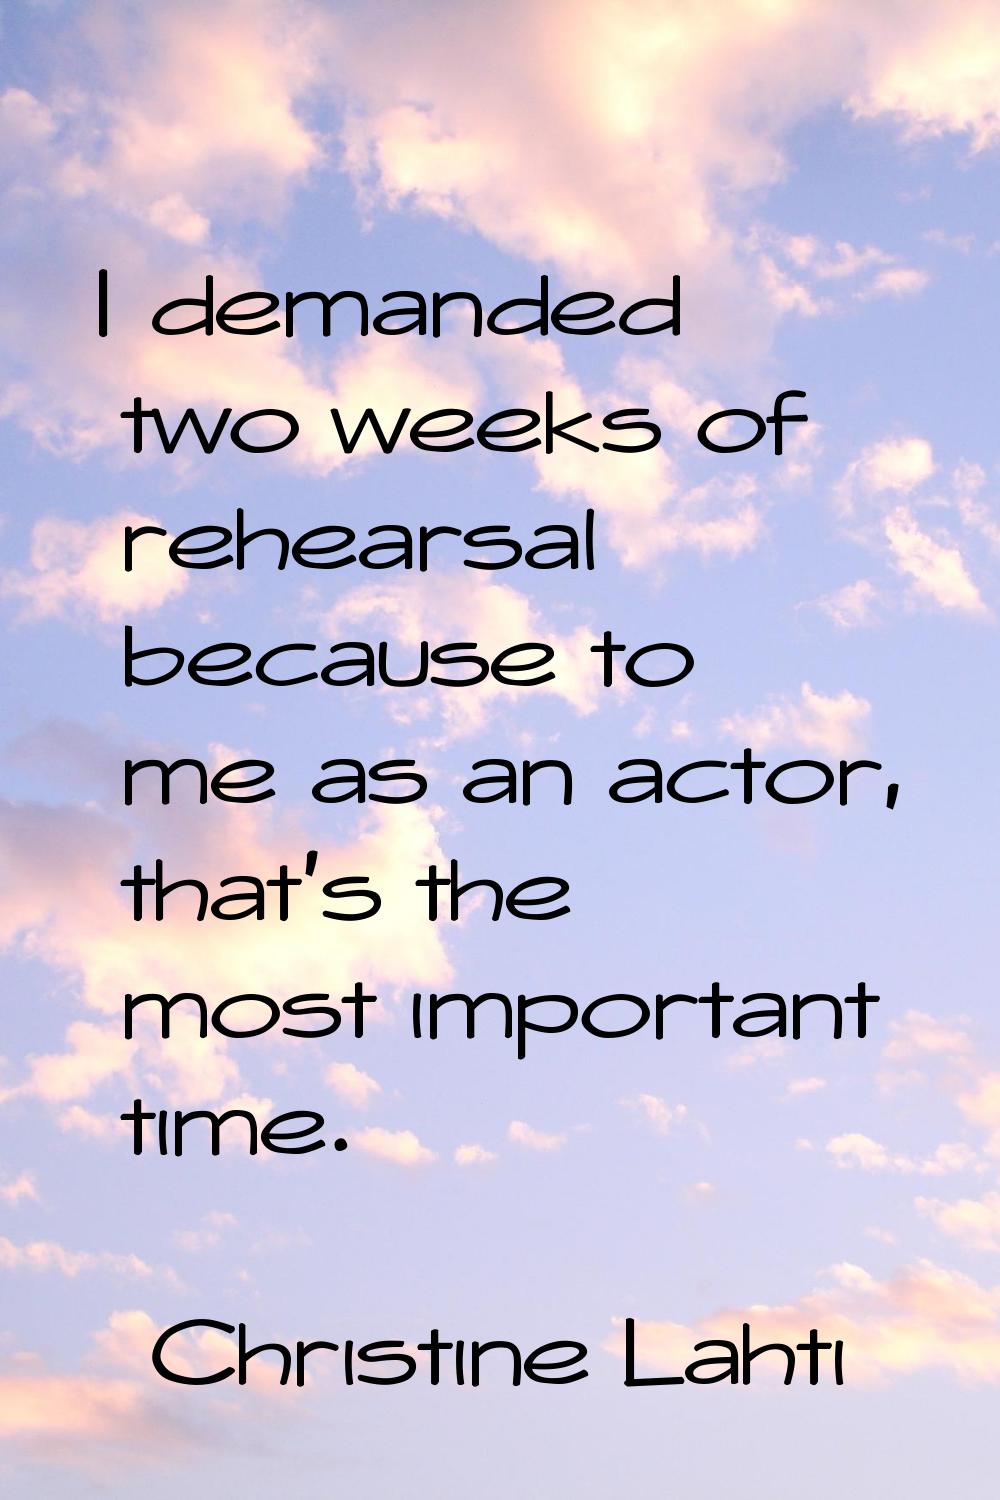 I demanded two weeks of rehearsal because to me as an actor, that's the most important time.